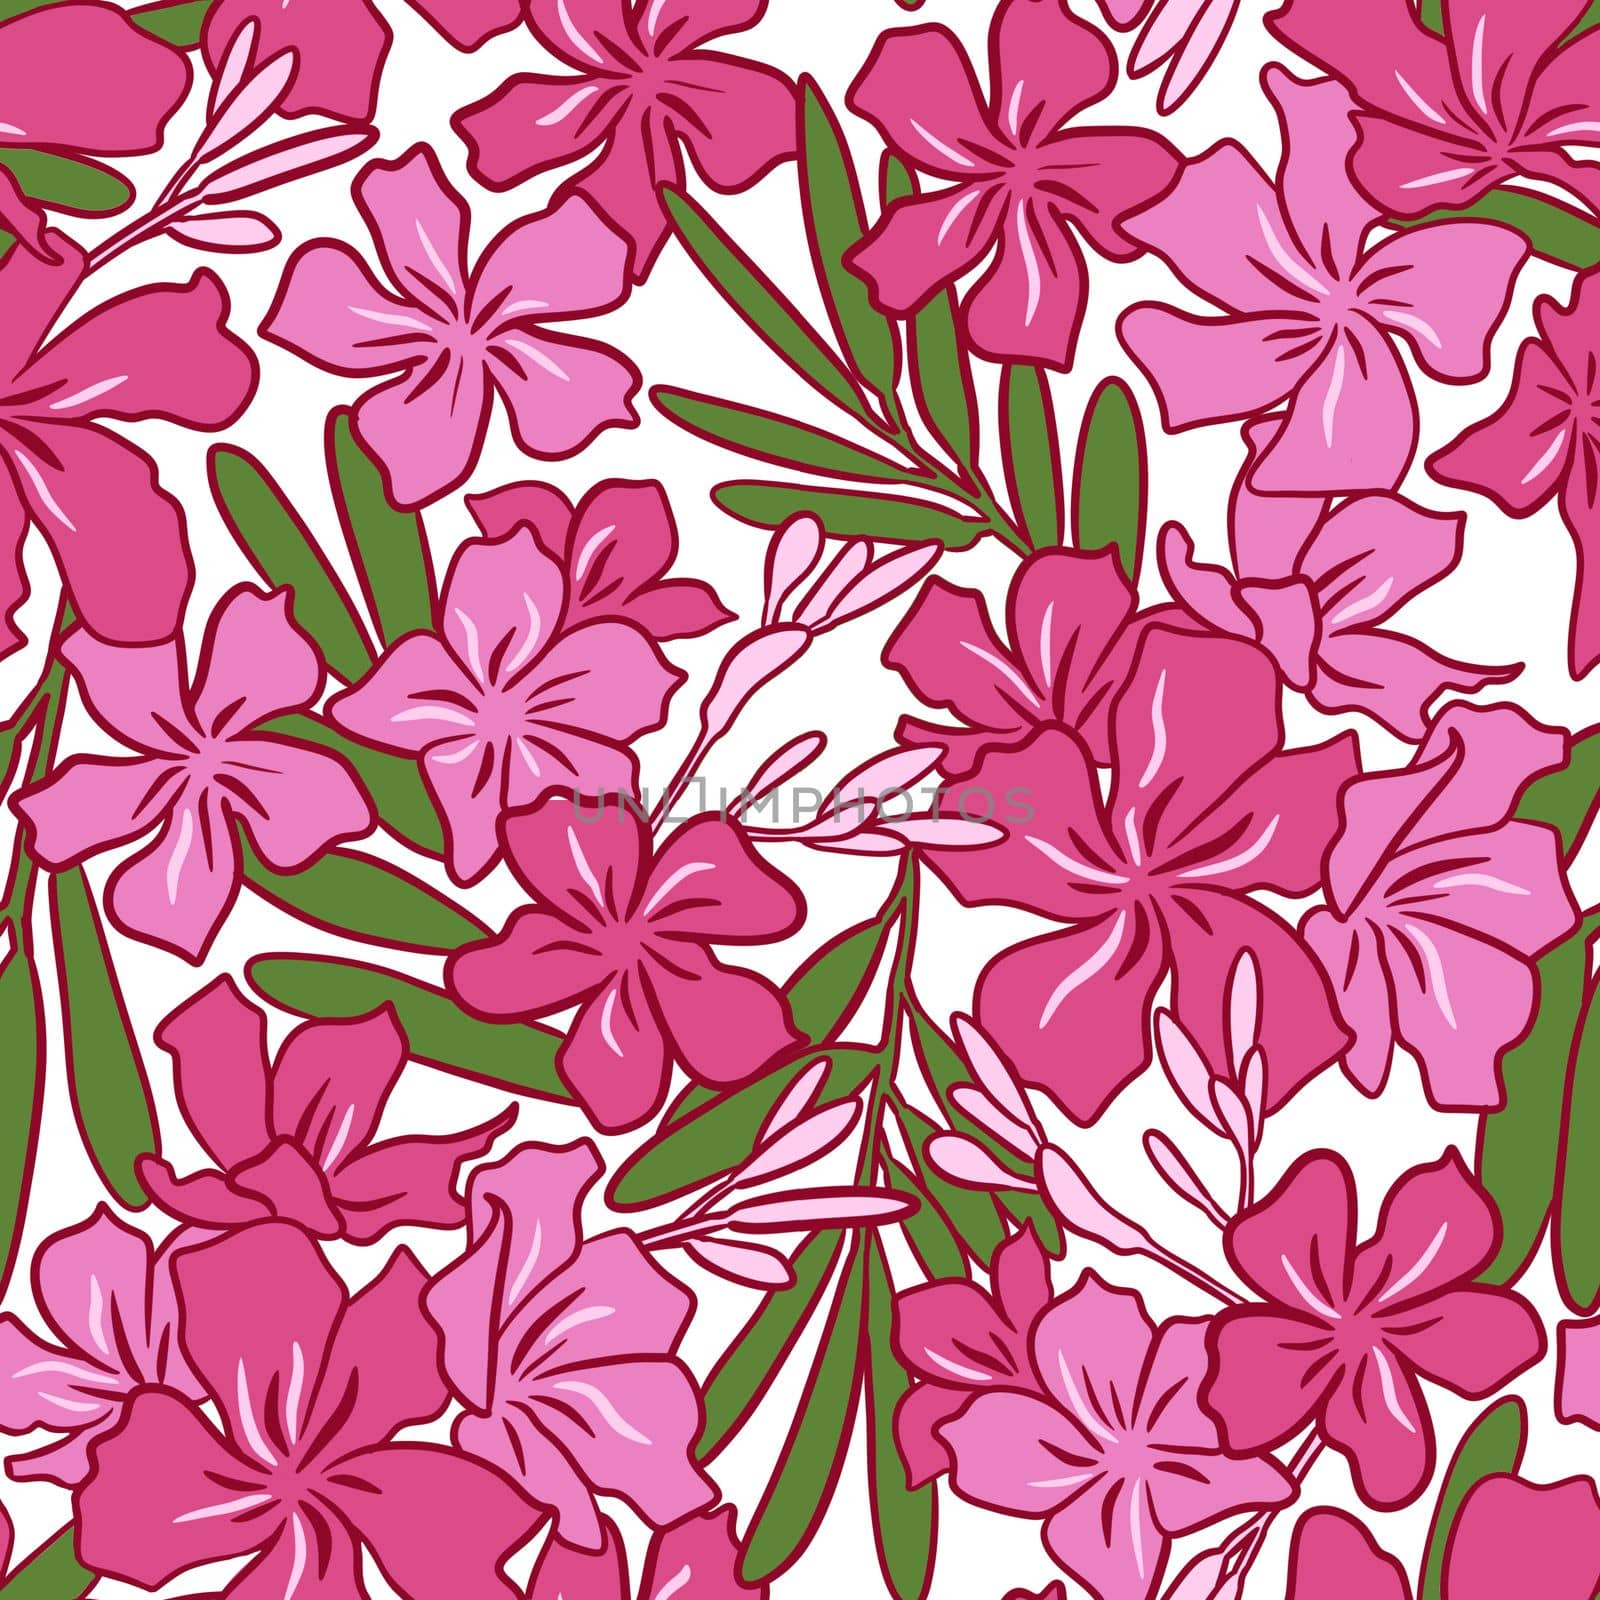 Hand drawn seamless patter of nerium oleander pink flowers green leaves on white background. Tropical floral summer spring fabric print, toxic poisonous plant nature bloom blossom background